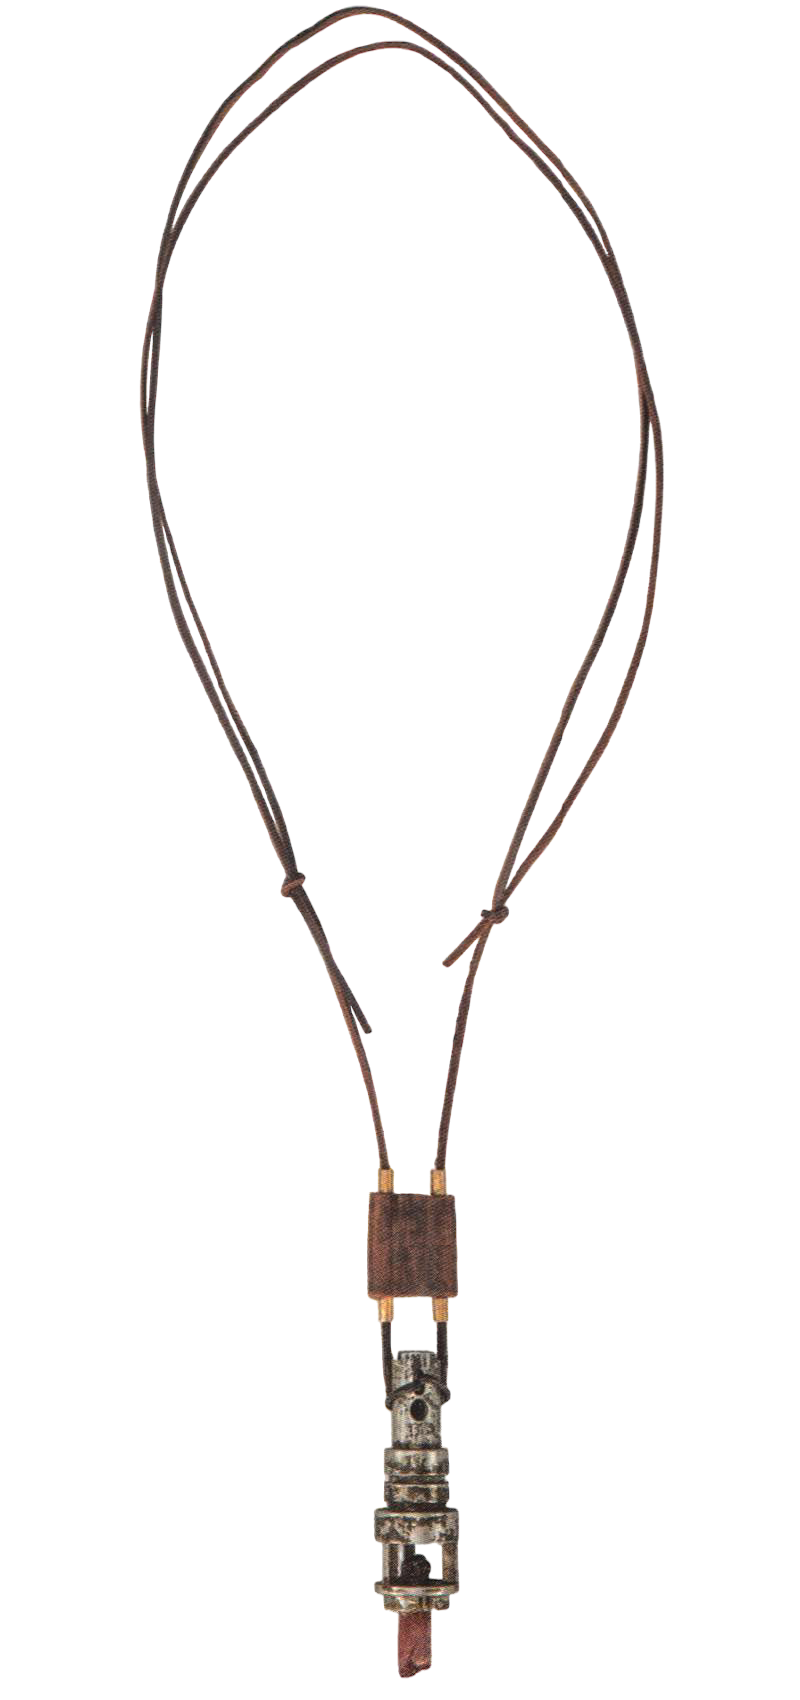 RockLove Jewelry adds Ahsoka and Darksaber necklaces to collection